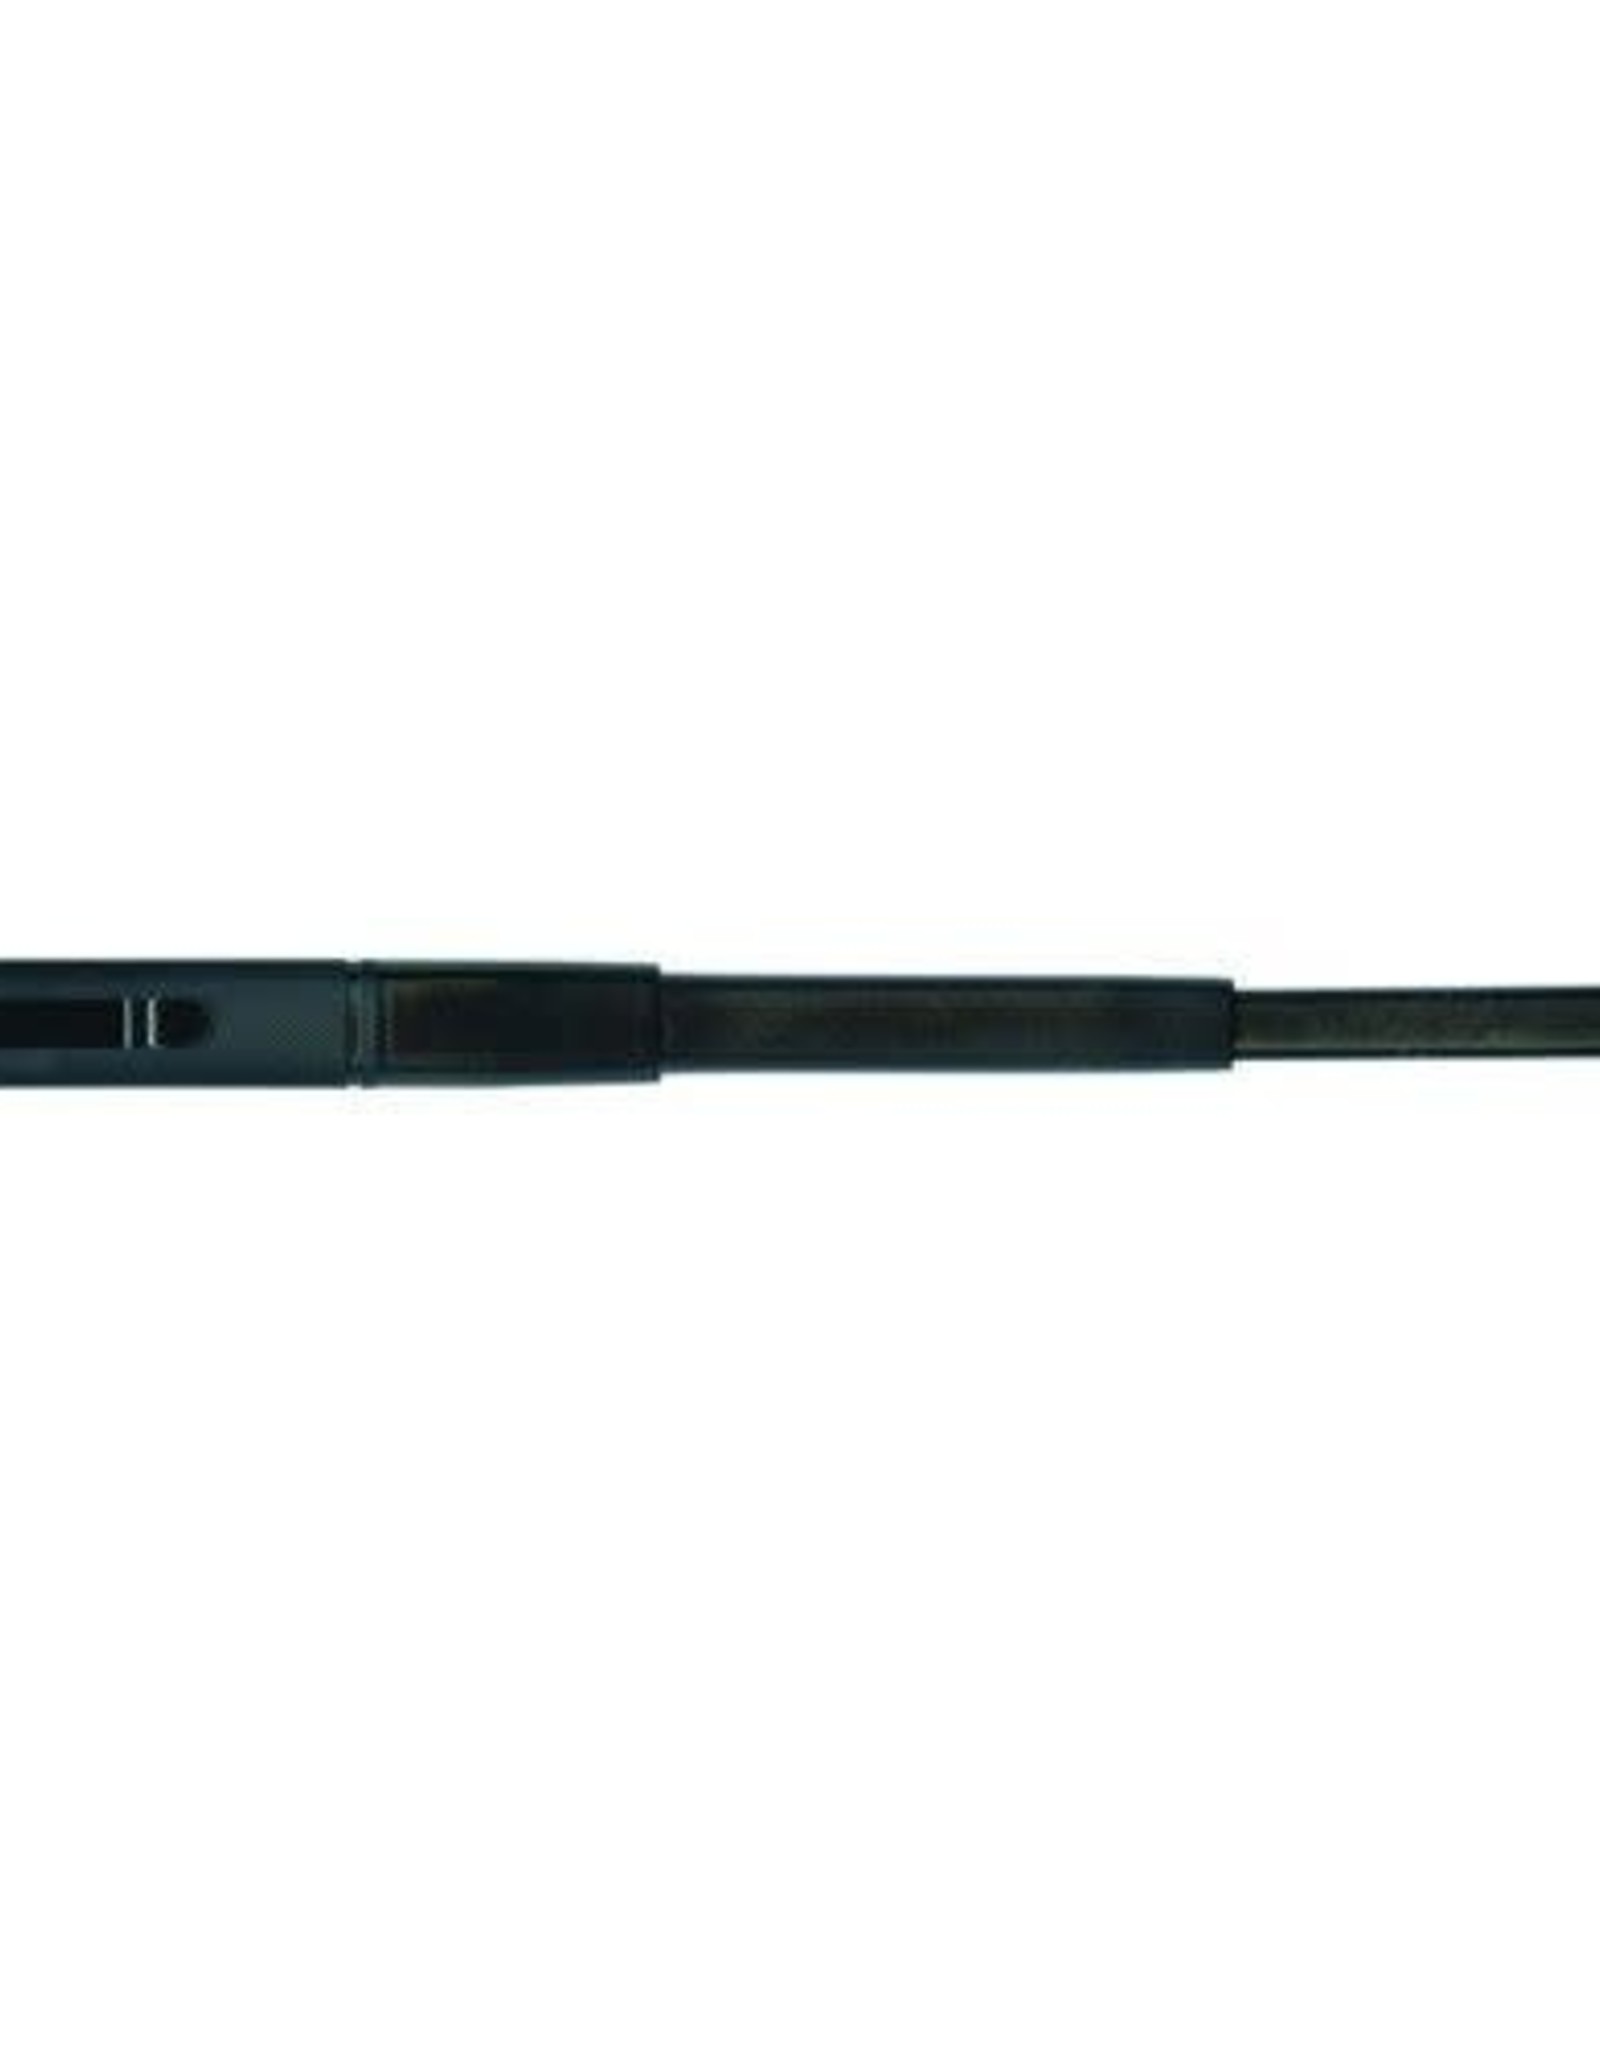 Smith & Wesson Collapsible Baton